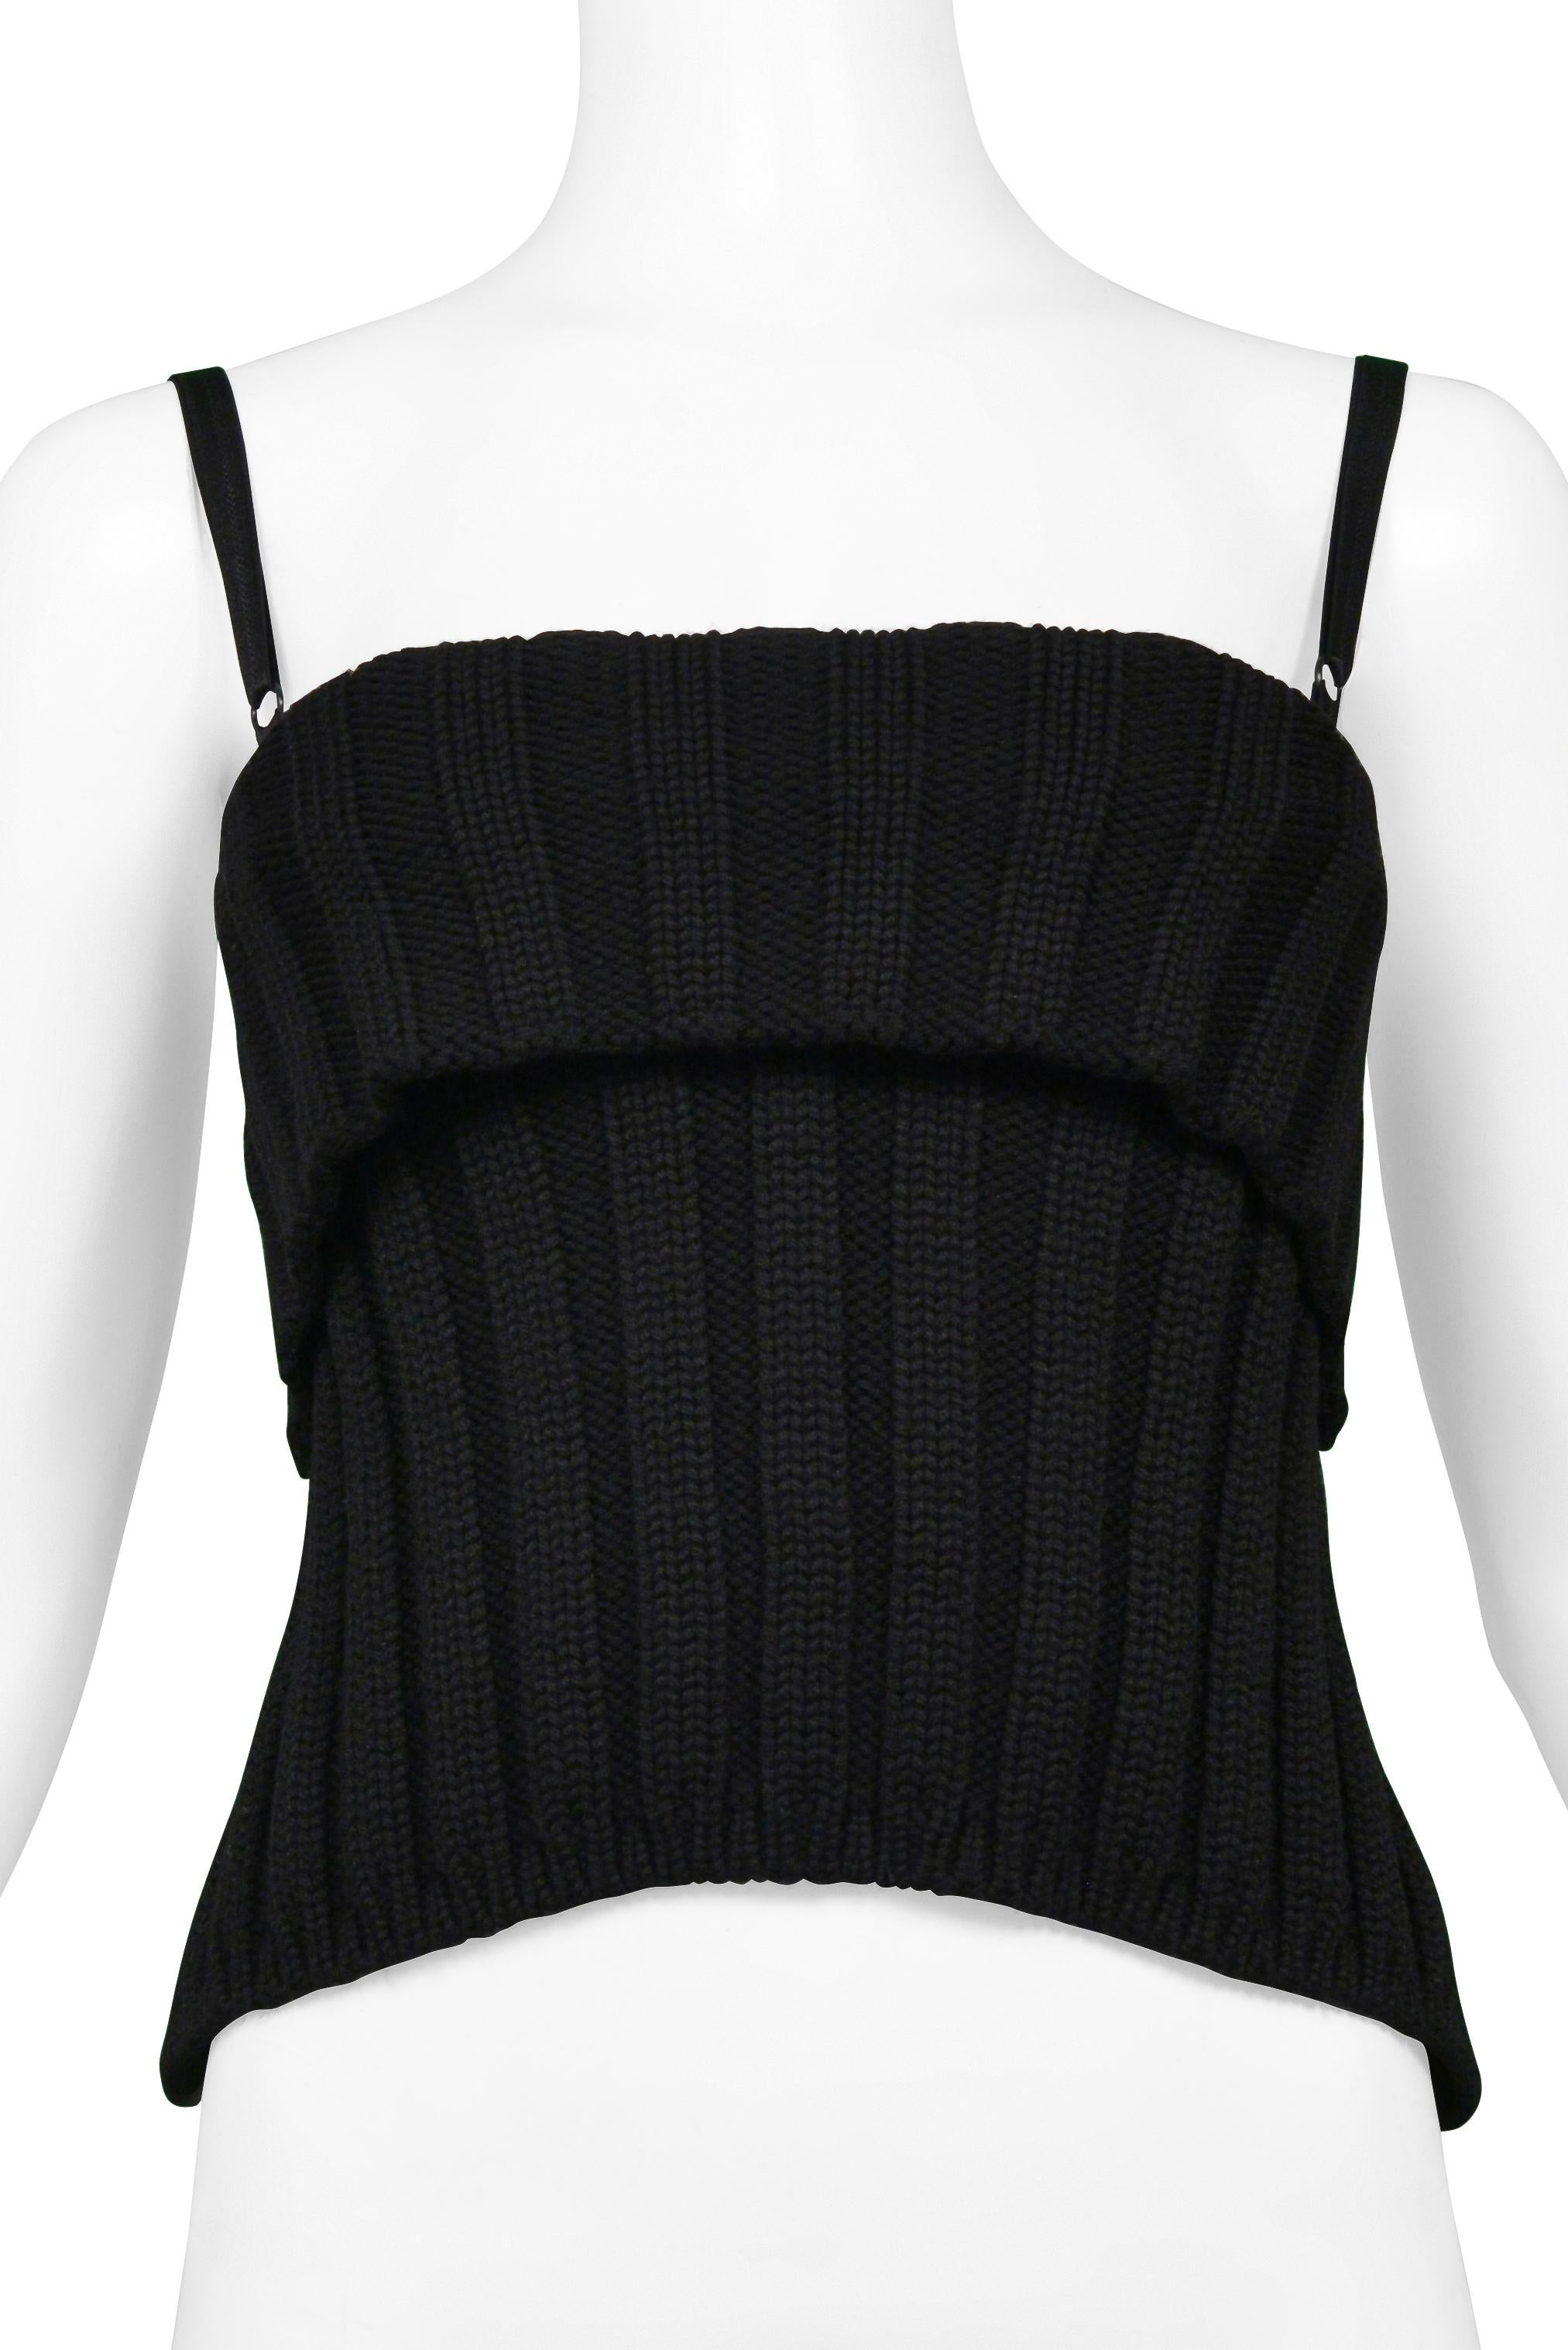 Women's Dolce & Gabbana Black Knit Corset Top With Attached Bra 1999